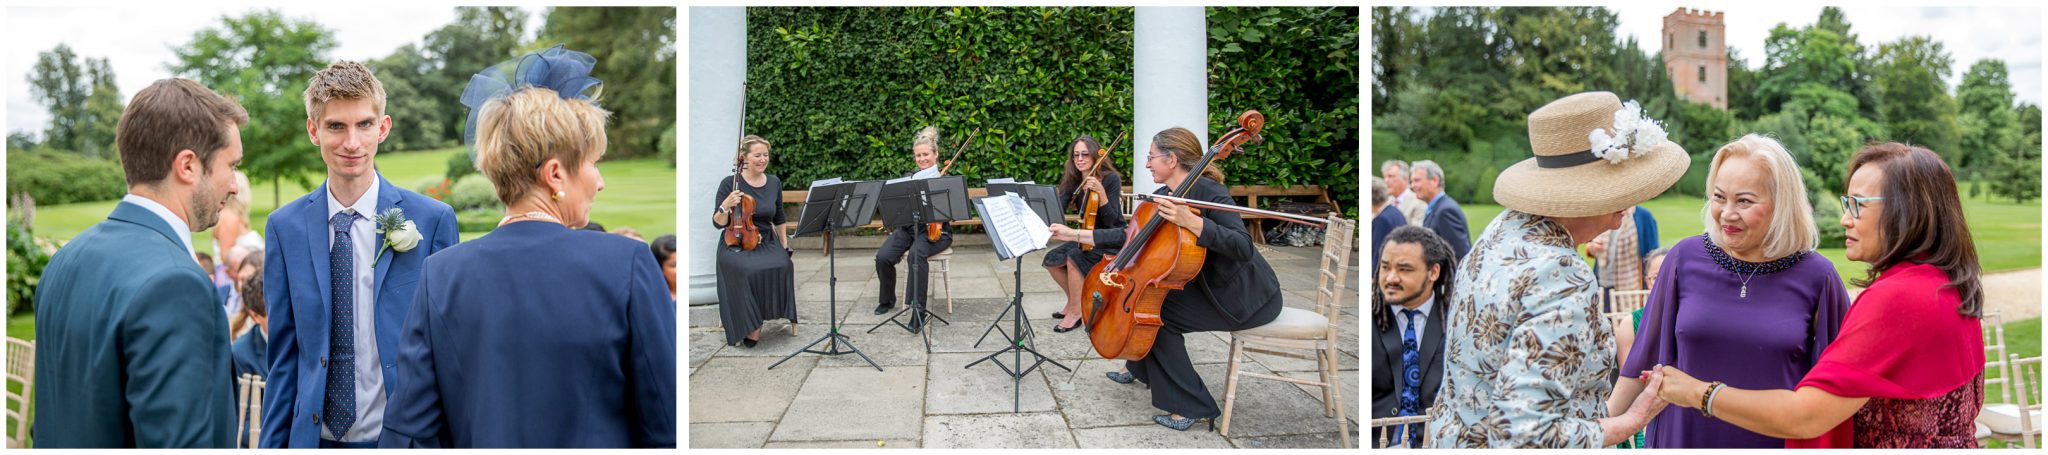 A string quartet plays outside as guests arrive for the wedding ceremony